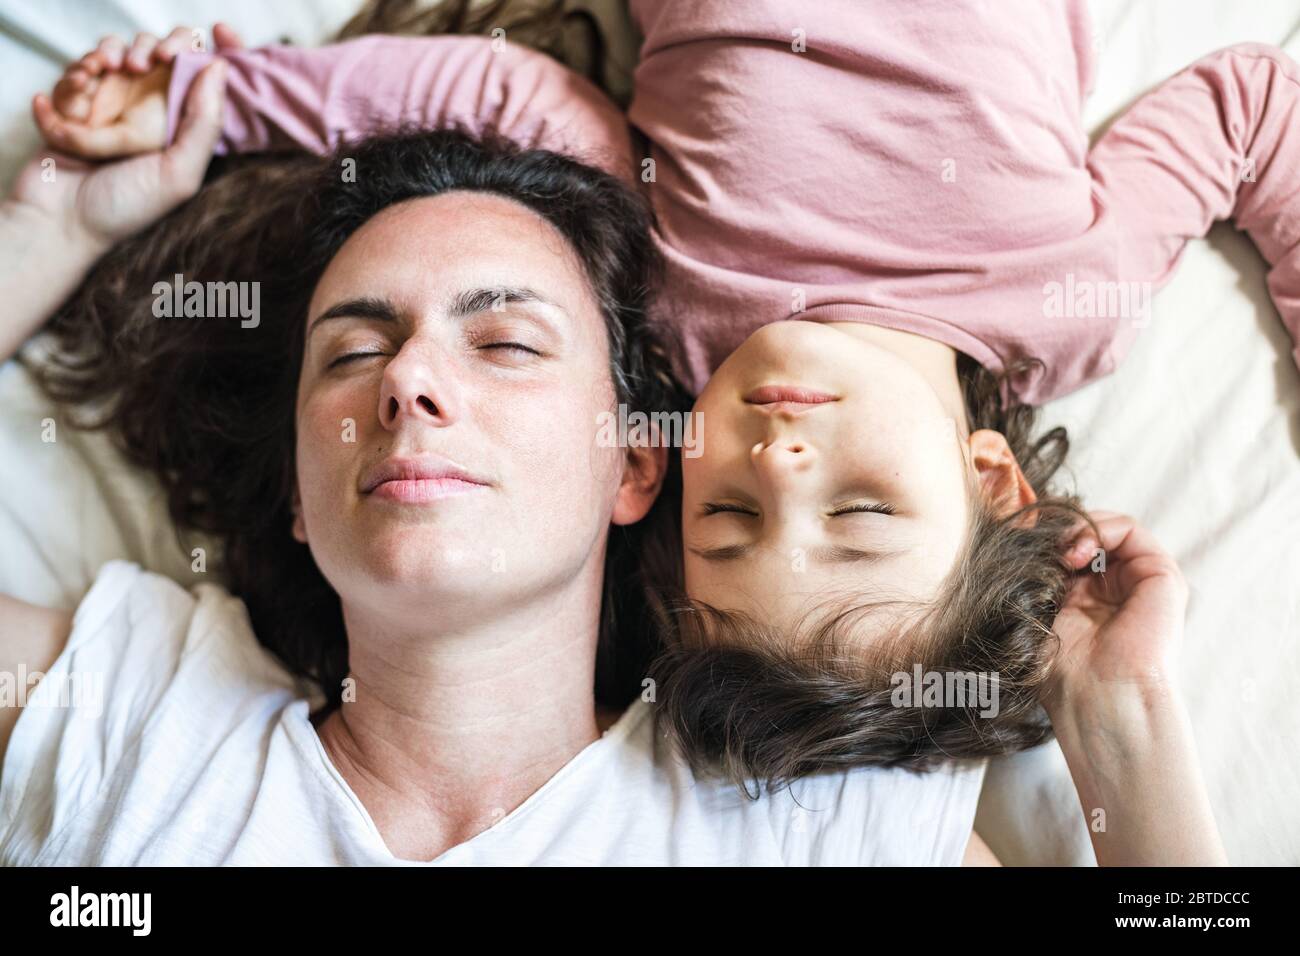 Mother and daughter lie down in bed with their heads facing up. Their eyes are closed having a moment of peace and connection Stock Photo